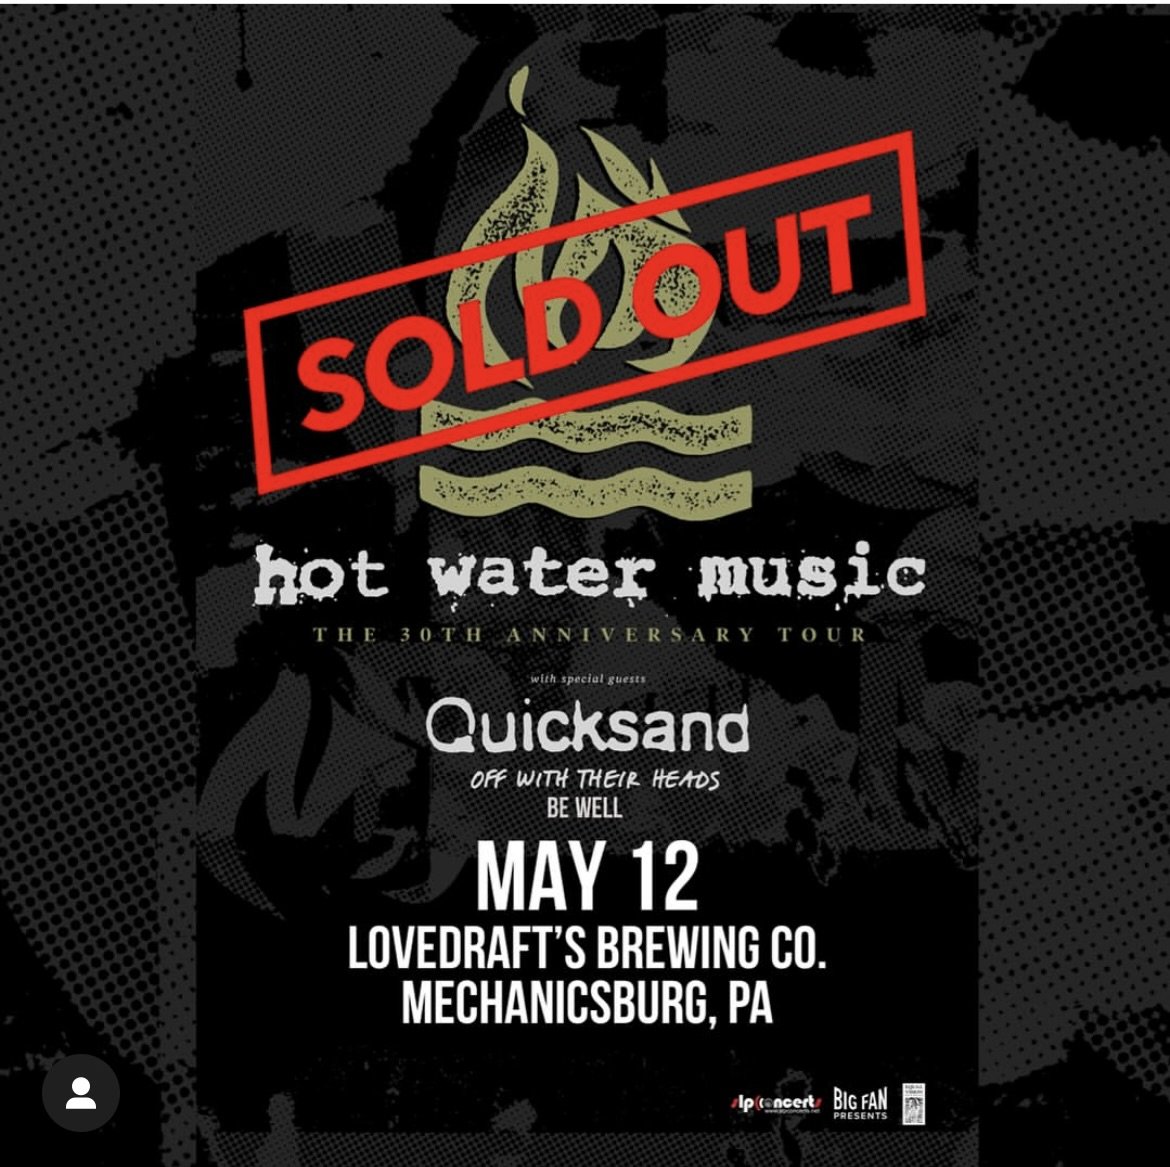 It is officially 1 week from the start of tour and Mechanicsburg is now SOLD OUT! Thank you ❤ 
See you all soon!
HWM